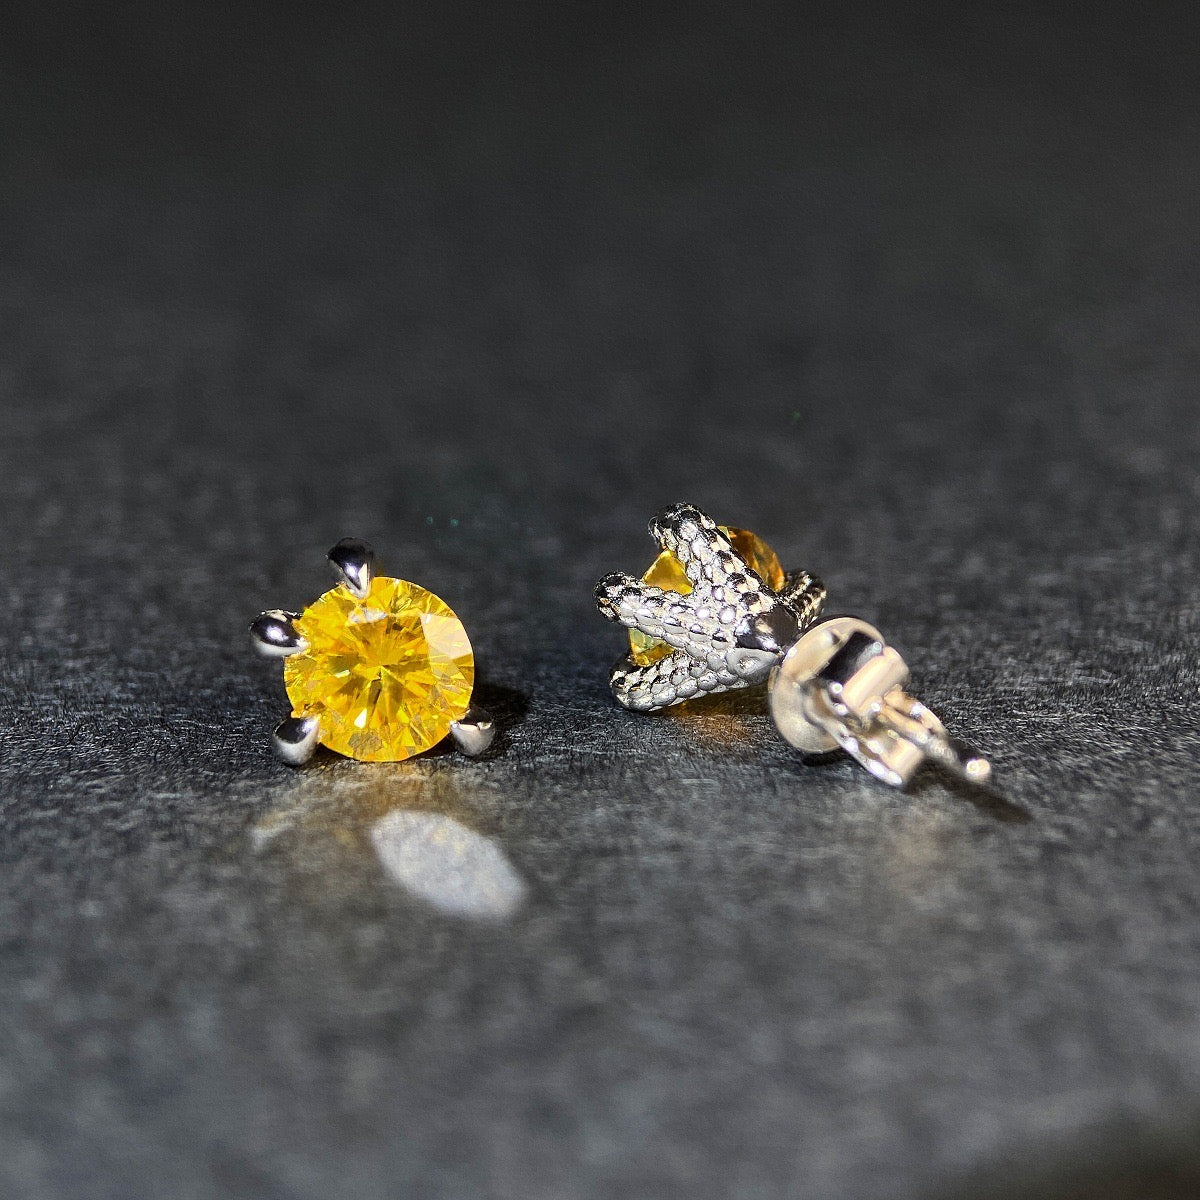 "Aegon" 0.5ct/1ct Dragon Claw Moissanite Earring Studs